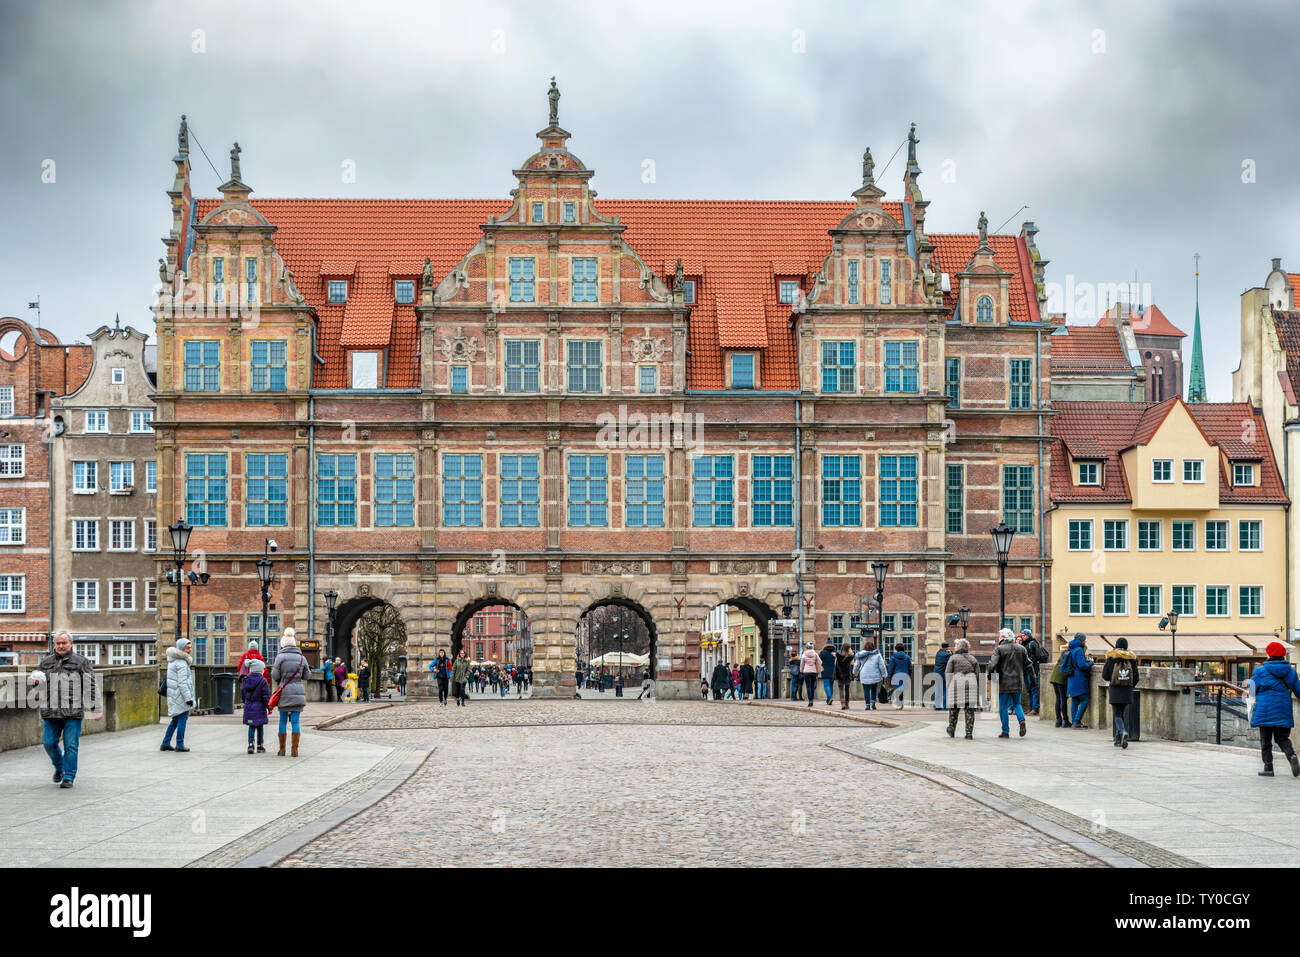 Gadansk, Poland - Feb 14, 2019: View at the Green gate in the old town of Gdansk Poland. Stock Photo